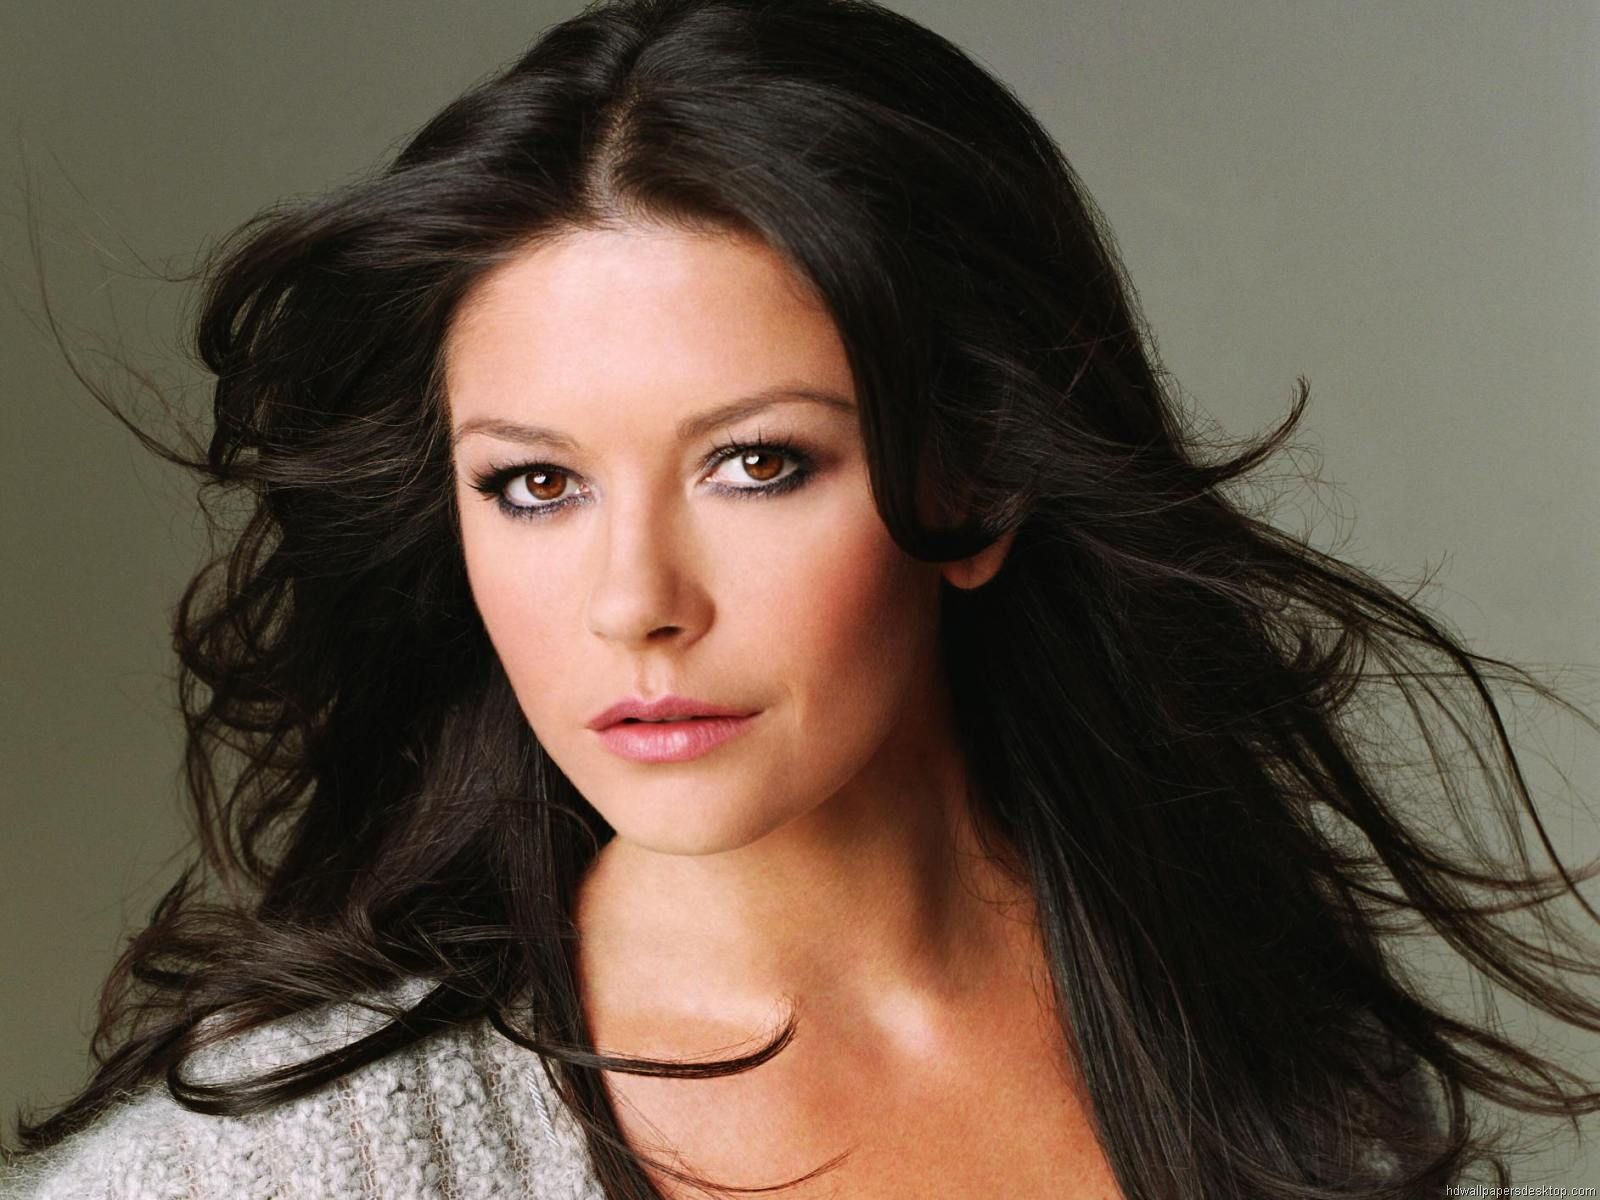 Catherine Zeta-Jones Says People Should Not Judge Who Prefer Going Under The Knife 